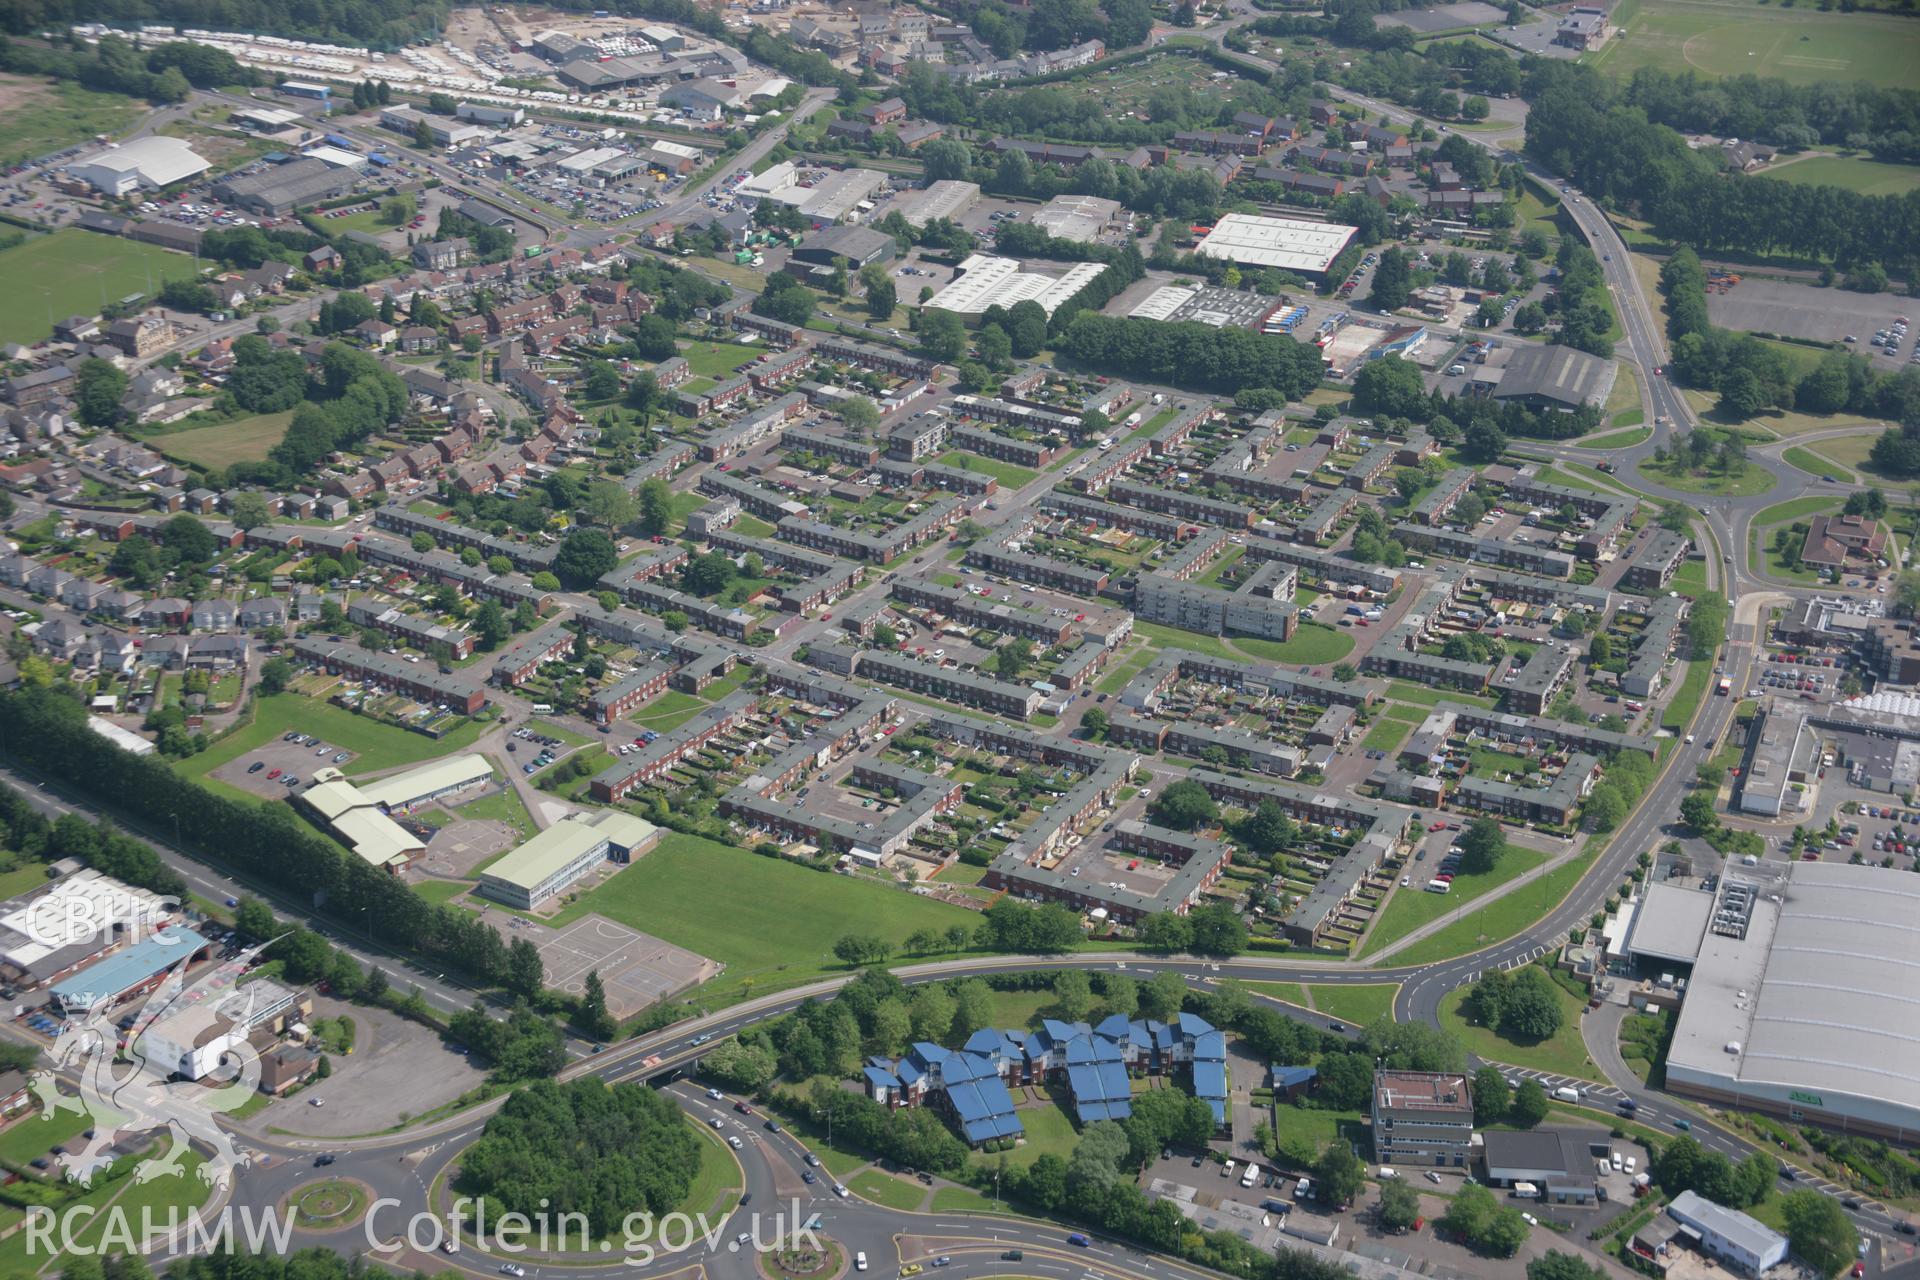 RCAHMW colour oblique aerial photograph of Cwmbran, including Northville, from the west. Taken on 09 June 2006 by Toby Driver.